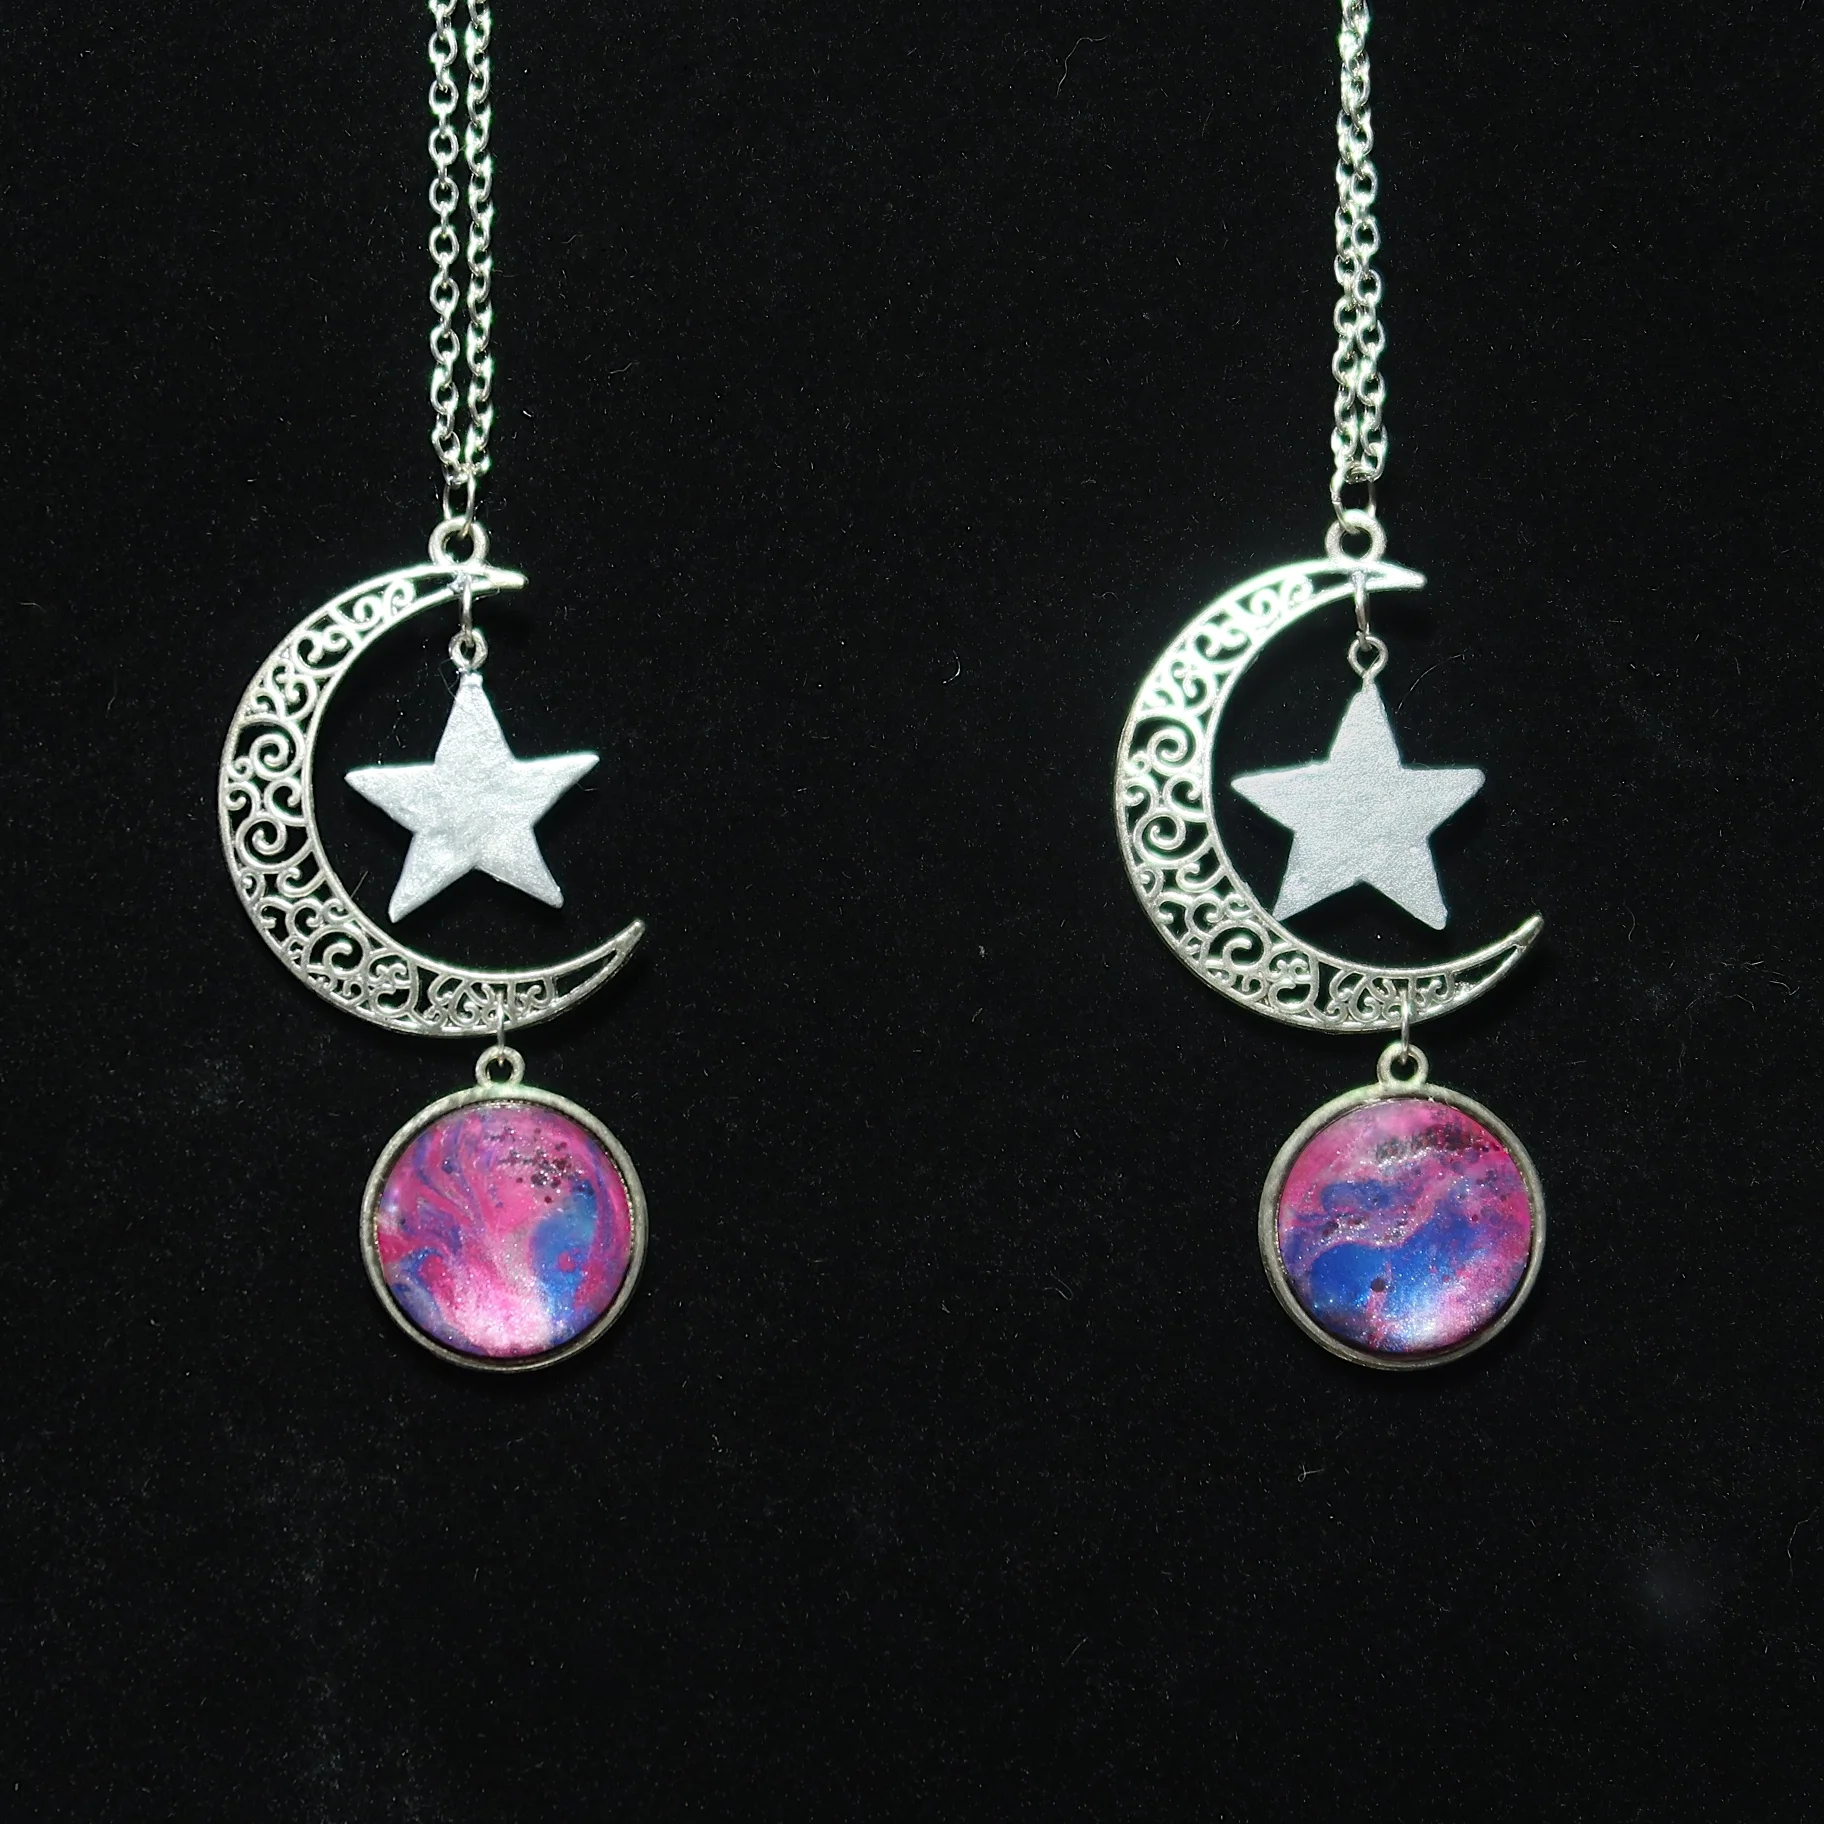 Star Moon Chain Necklace  - $25.00